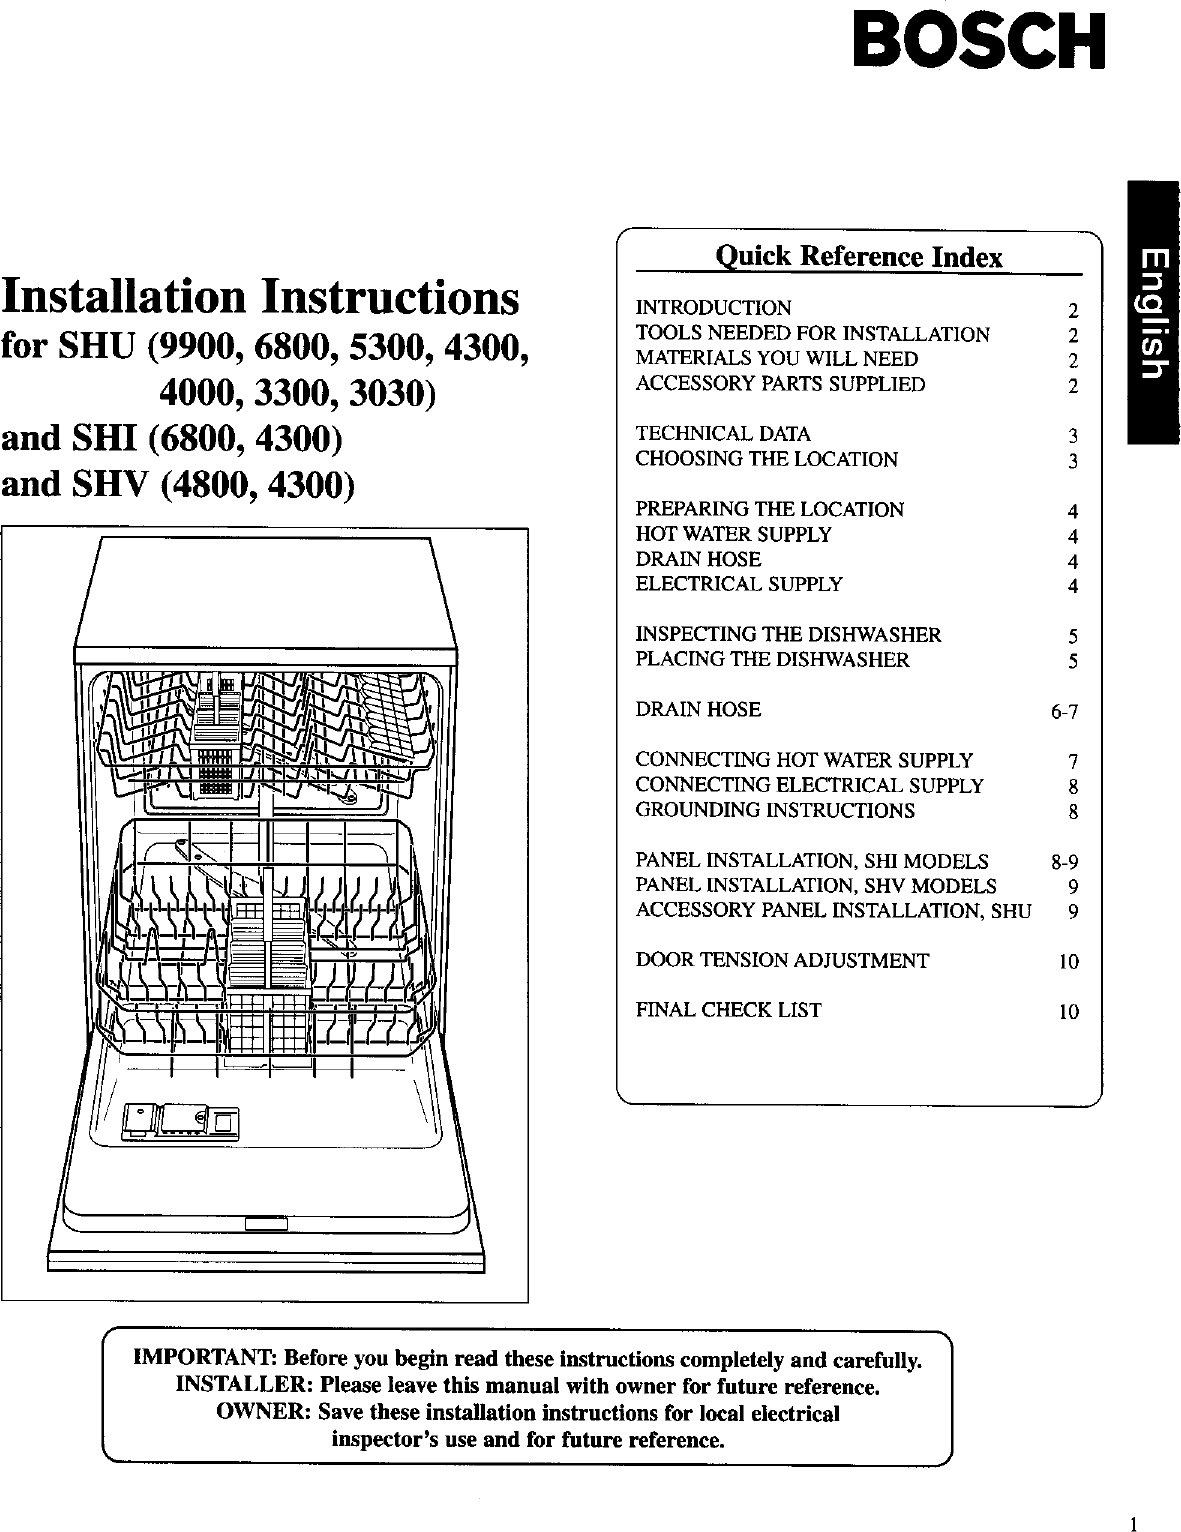 How to install a bosch dishwasher instruction manual